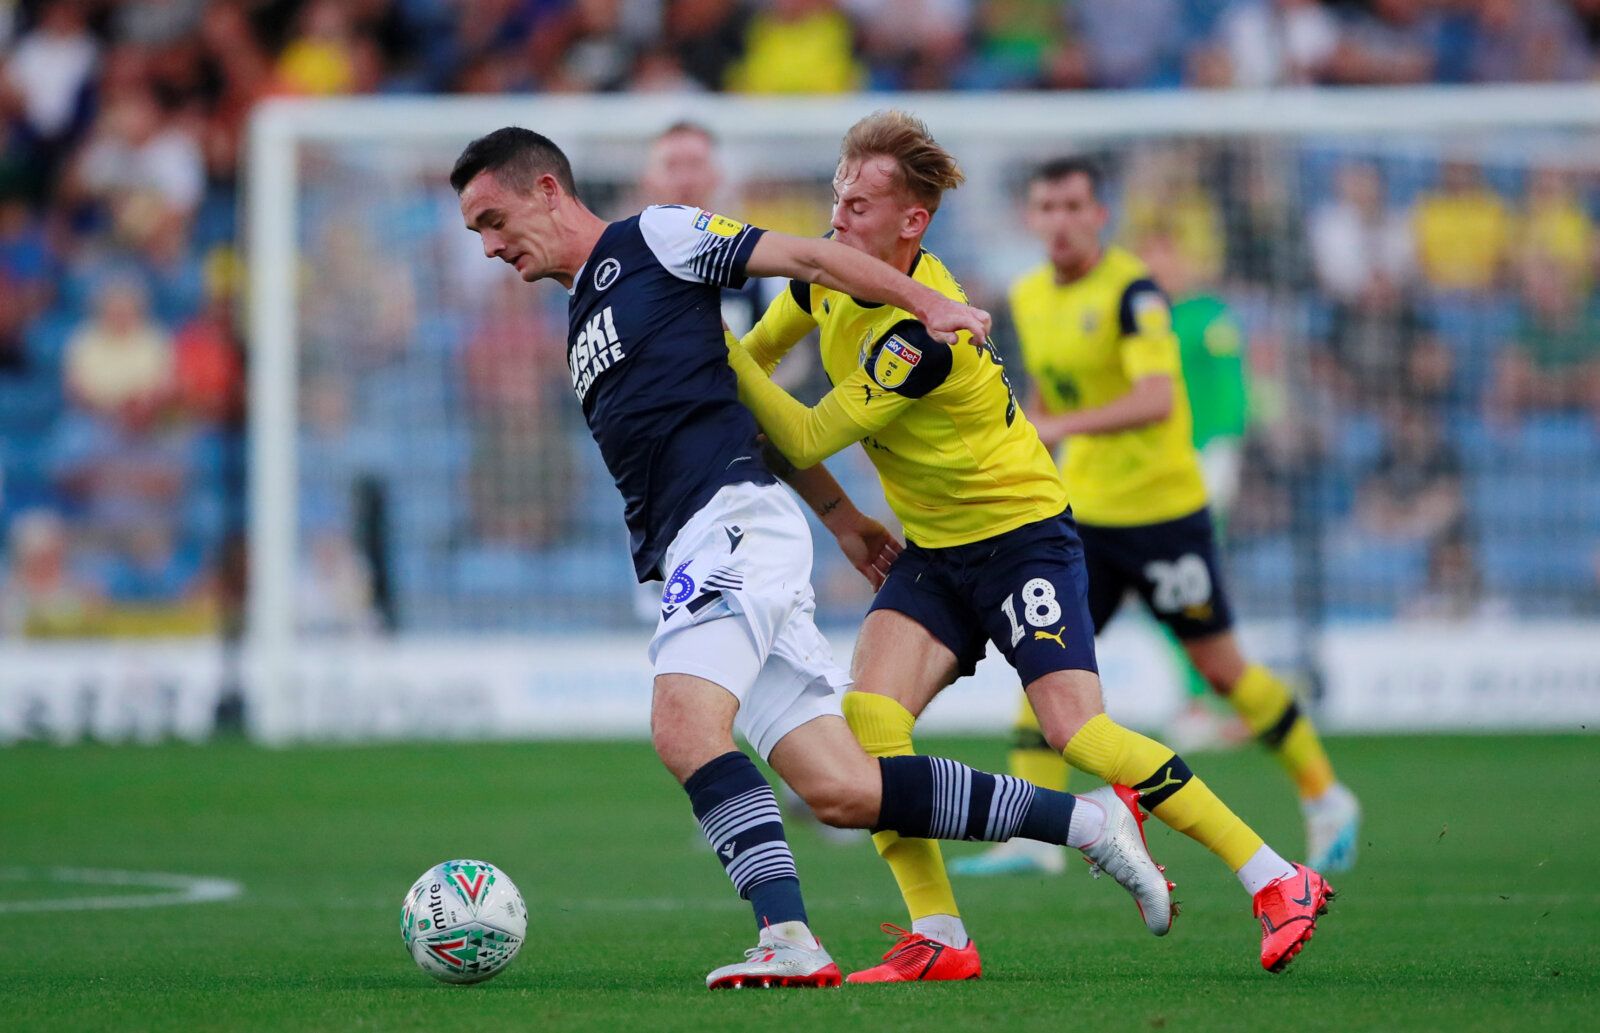 Soccer Football - Carabao Cup Second Round - Oxford United v Millwall - Kassam Stadium, Oxford, Britain - August 27, 2019   Oxford United's Mark Sykes in action with Millwall's Shaun Williams   Action Images via Reuters/Andrew Couldridge    EDITORIAL USE ONLY. No use with unauthorized audio, video, data, fixture lists, club/league logos or 